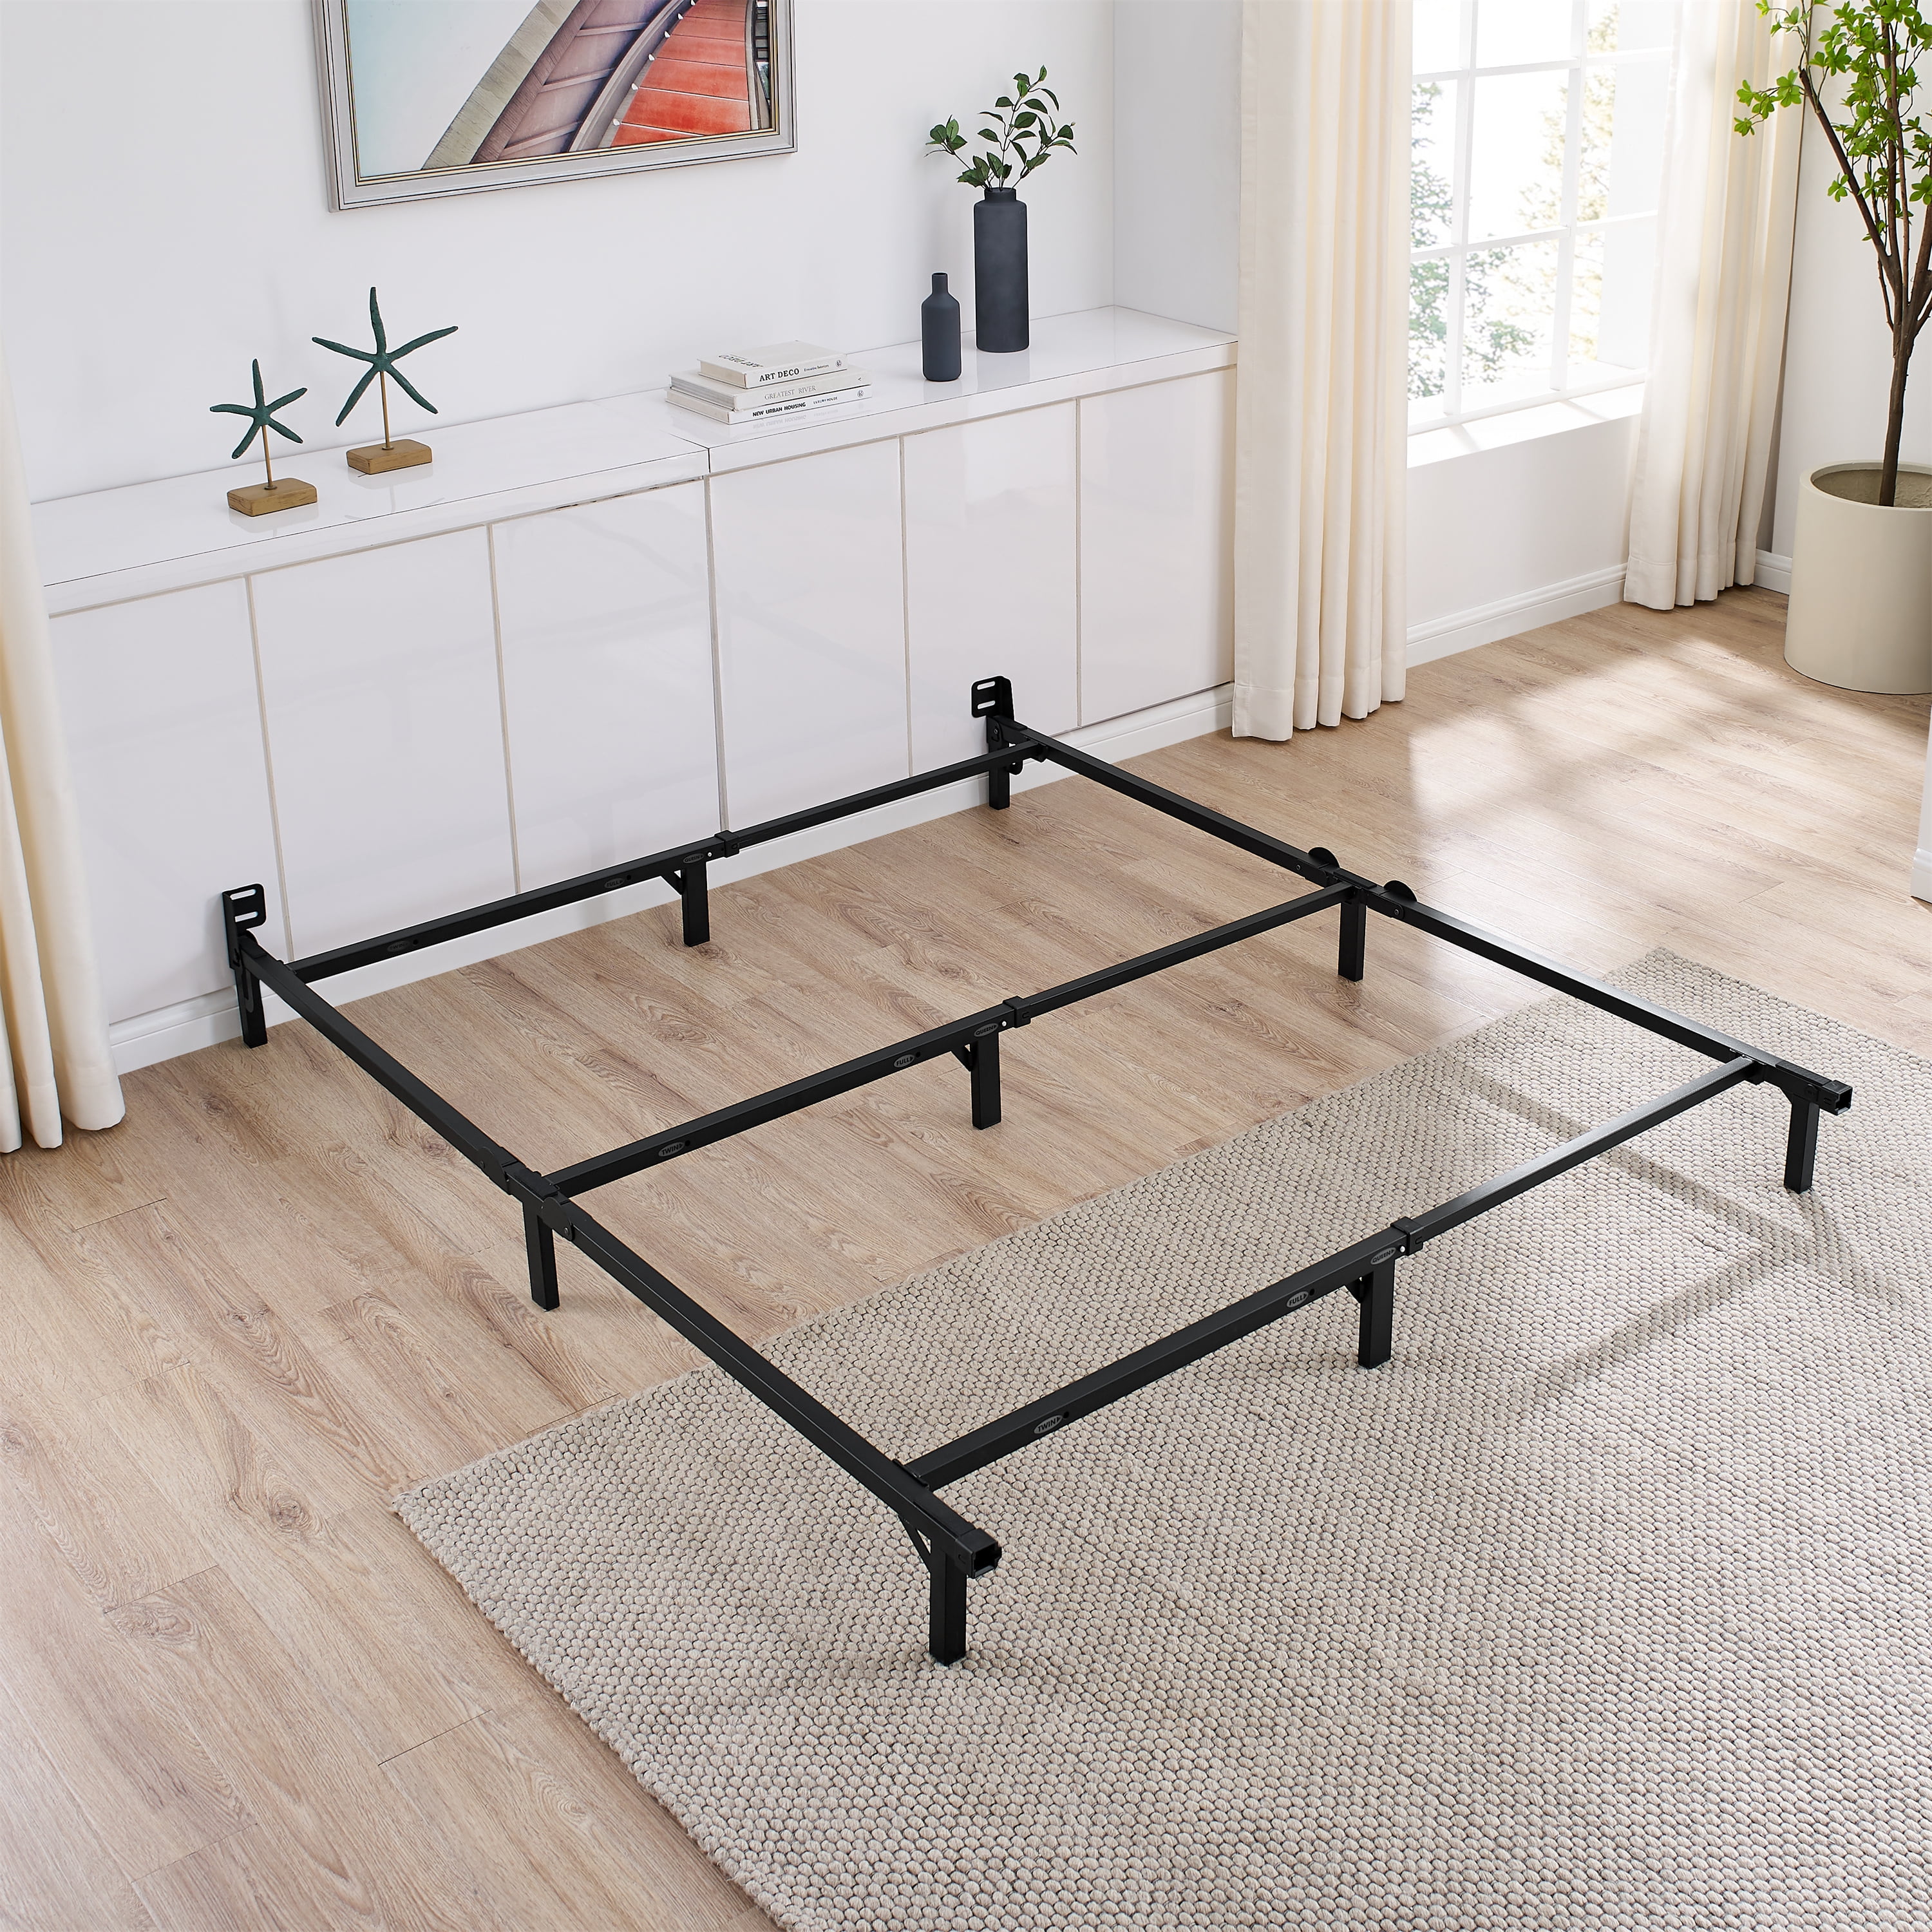 Mainstays 7" Adjustable Metal Bed Frame, Black, Adjusts Twin - Queen, Box Spring Required